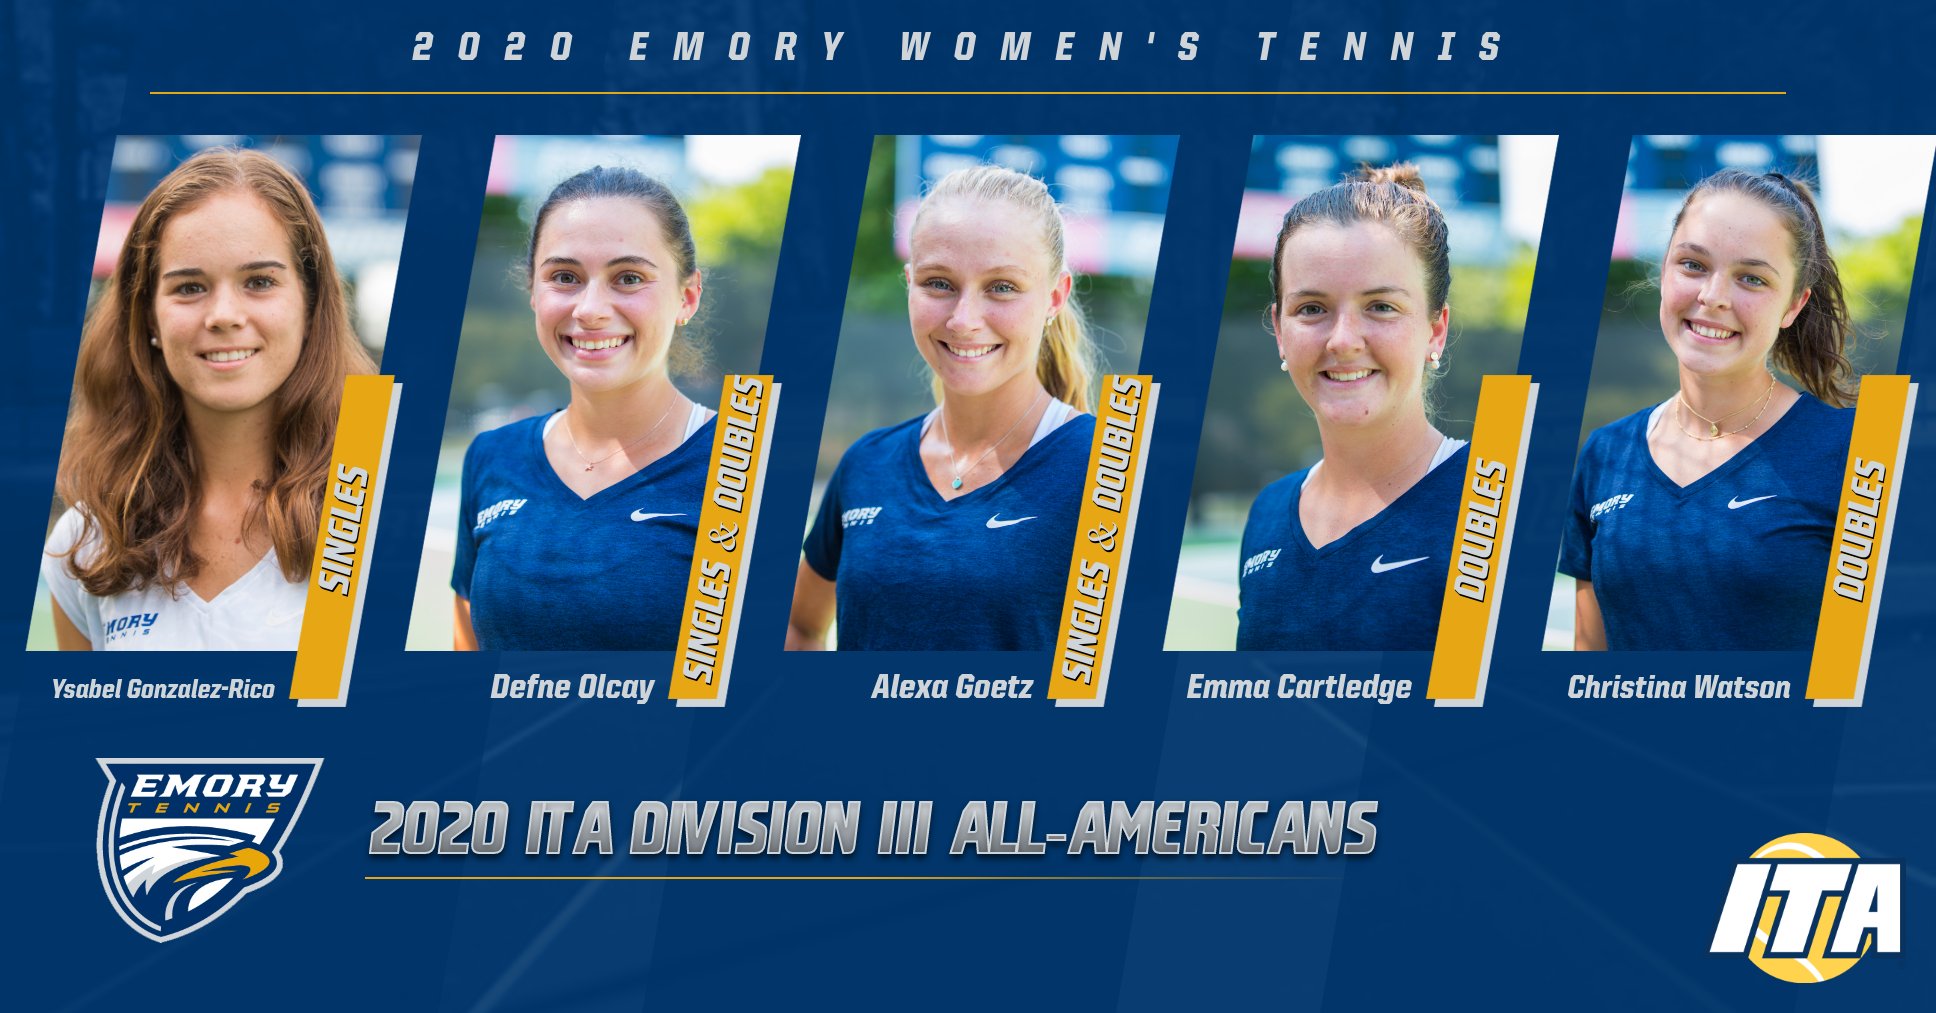 Five From Women's Tennis Named ITA All-Americans